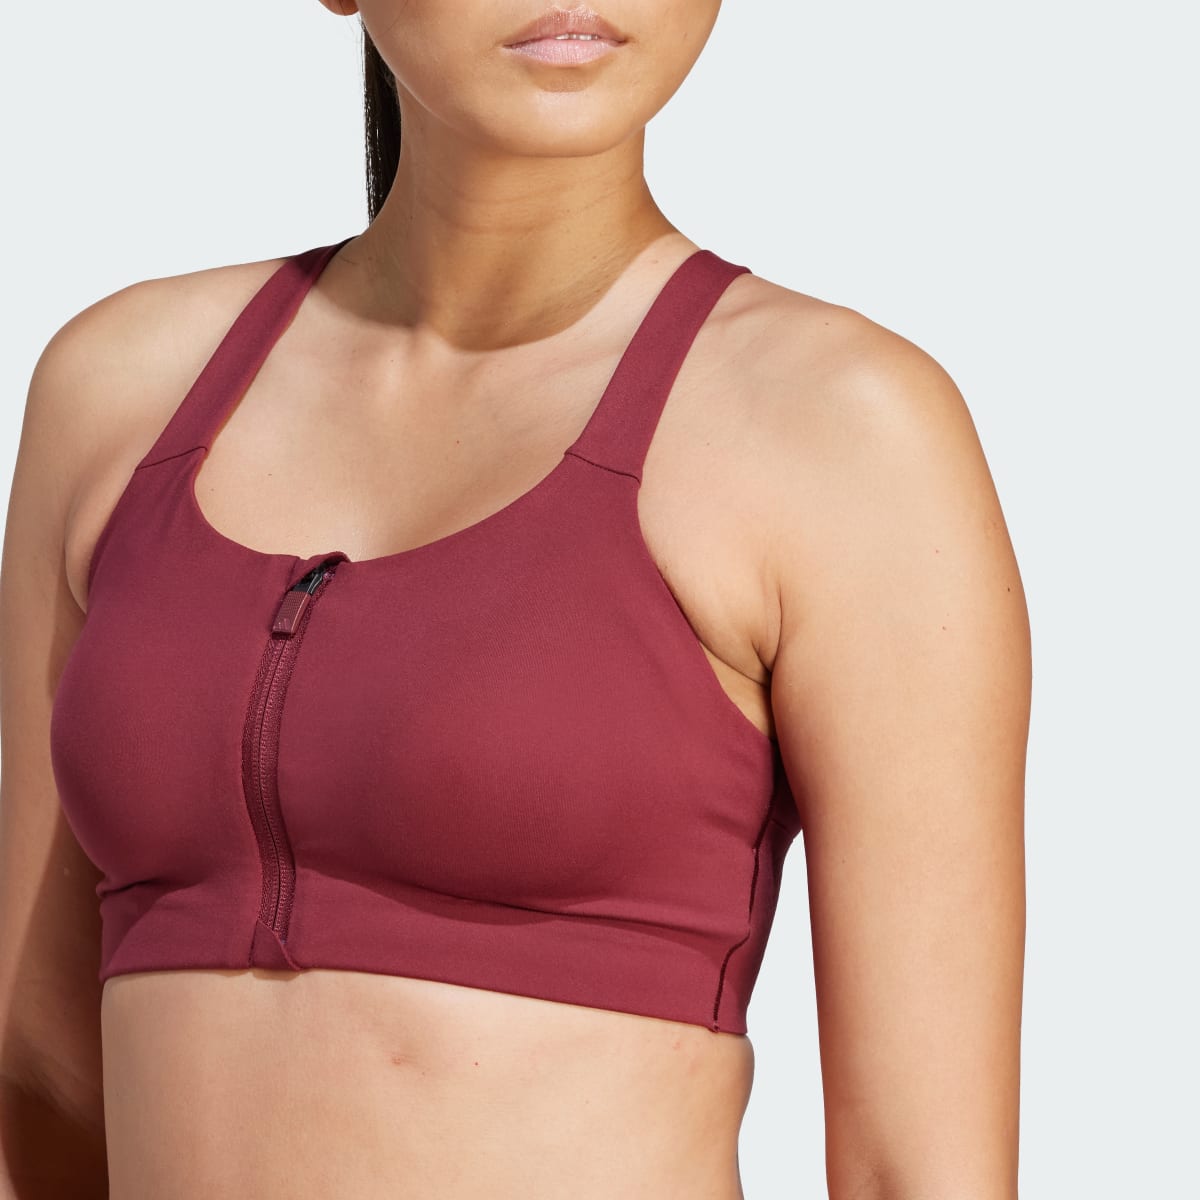 Adidas TLRD Impact Luxe High-Support Zip Bra. 7